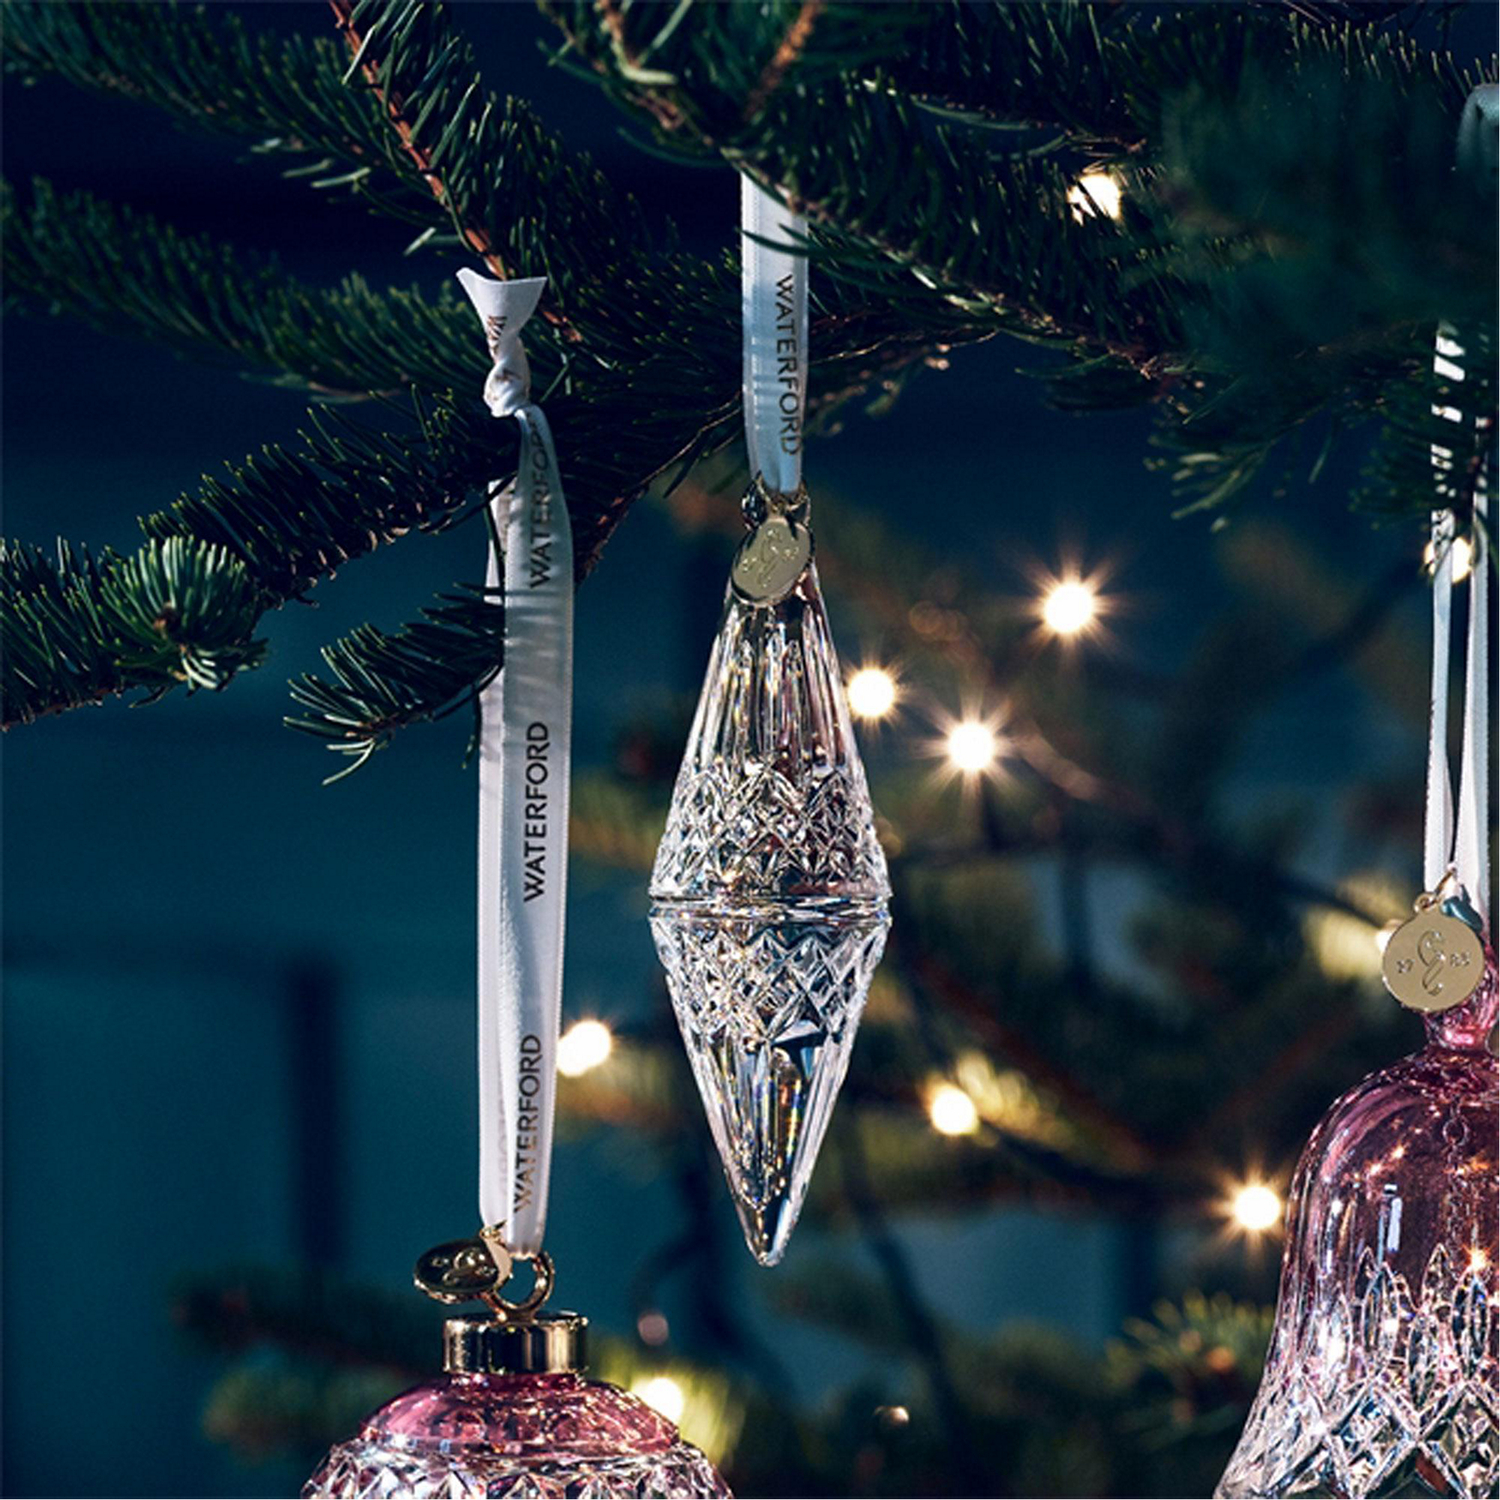 Lismore Icicle Ornament